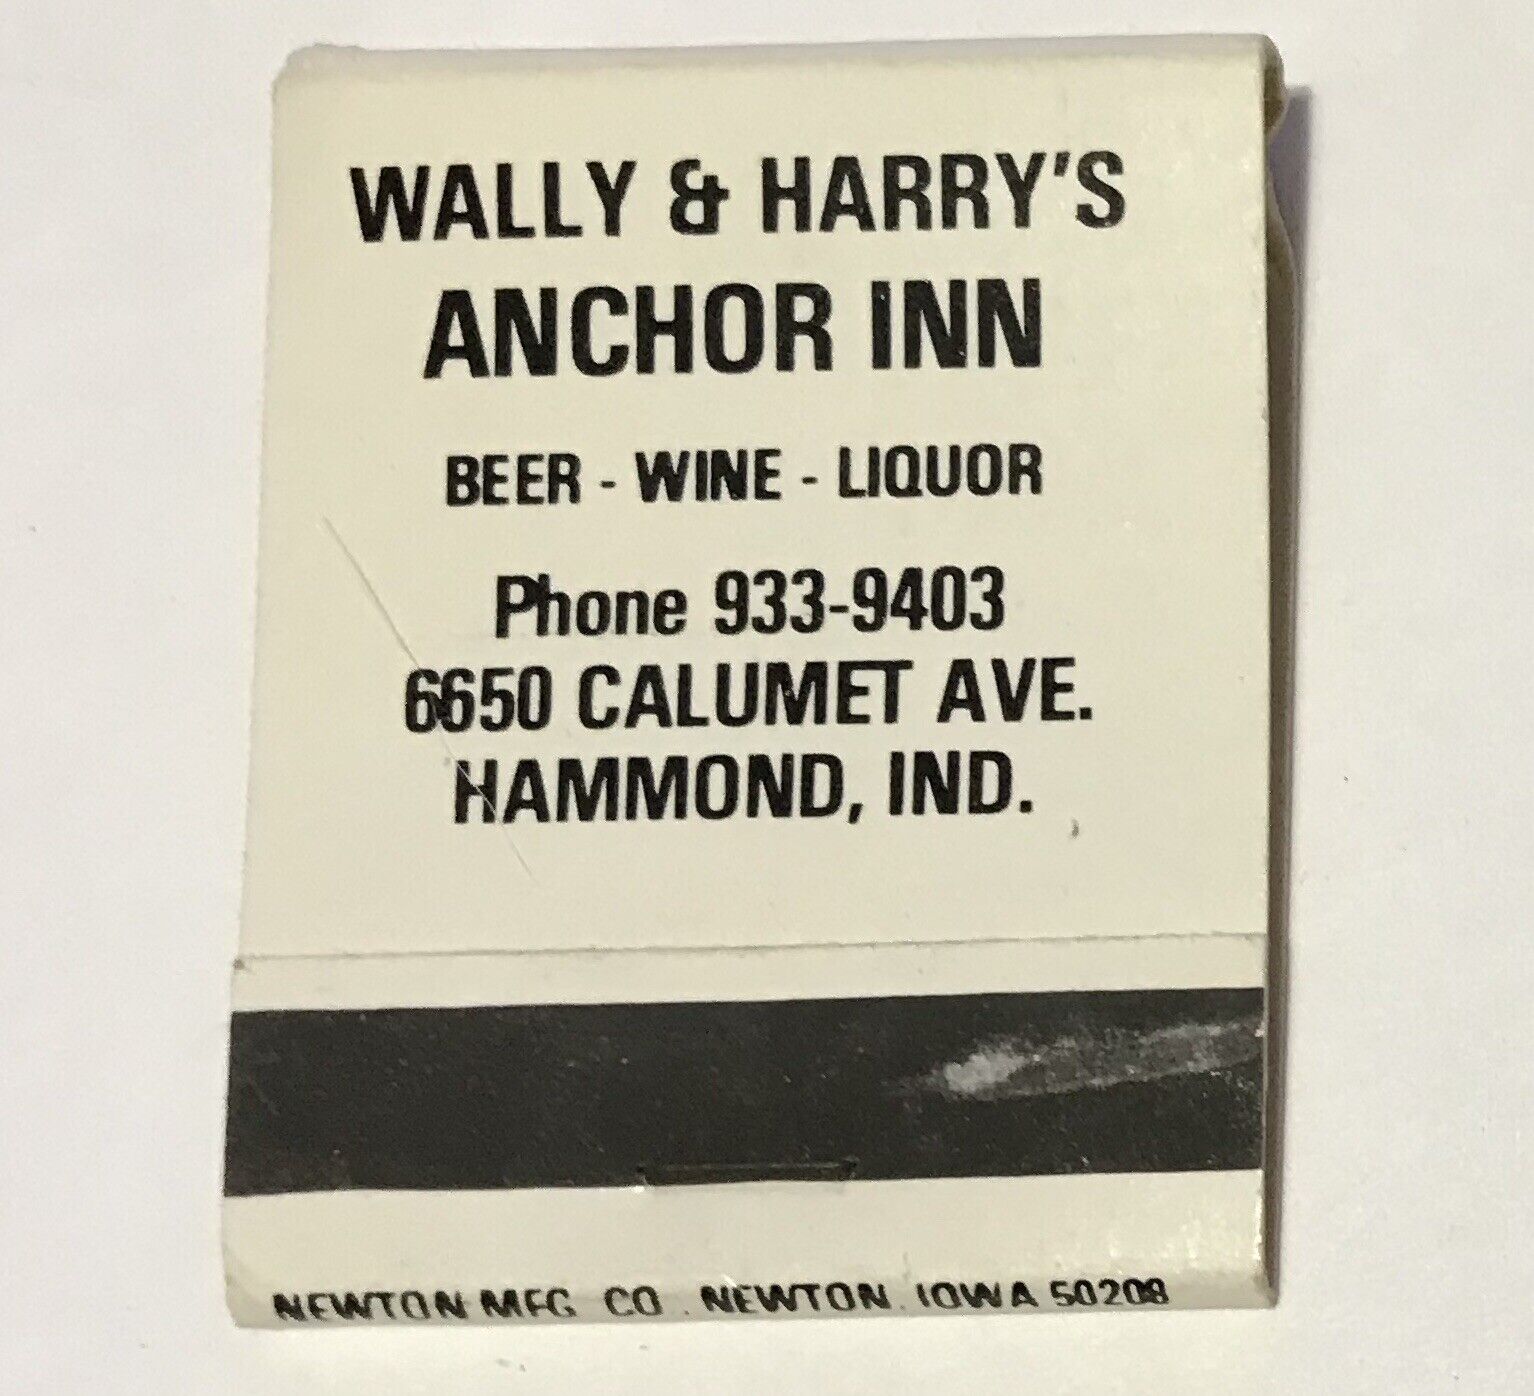 Vintage Promotional Advertising Matchbook Wally & Harry's Anchor Inn Hammond, IN